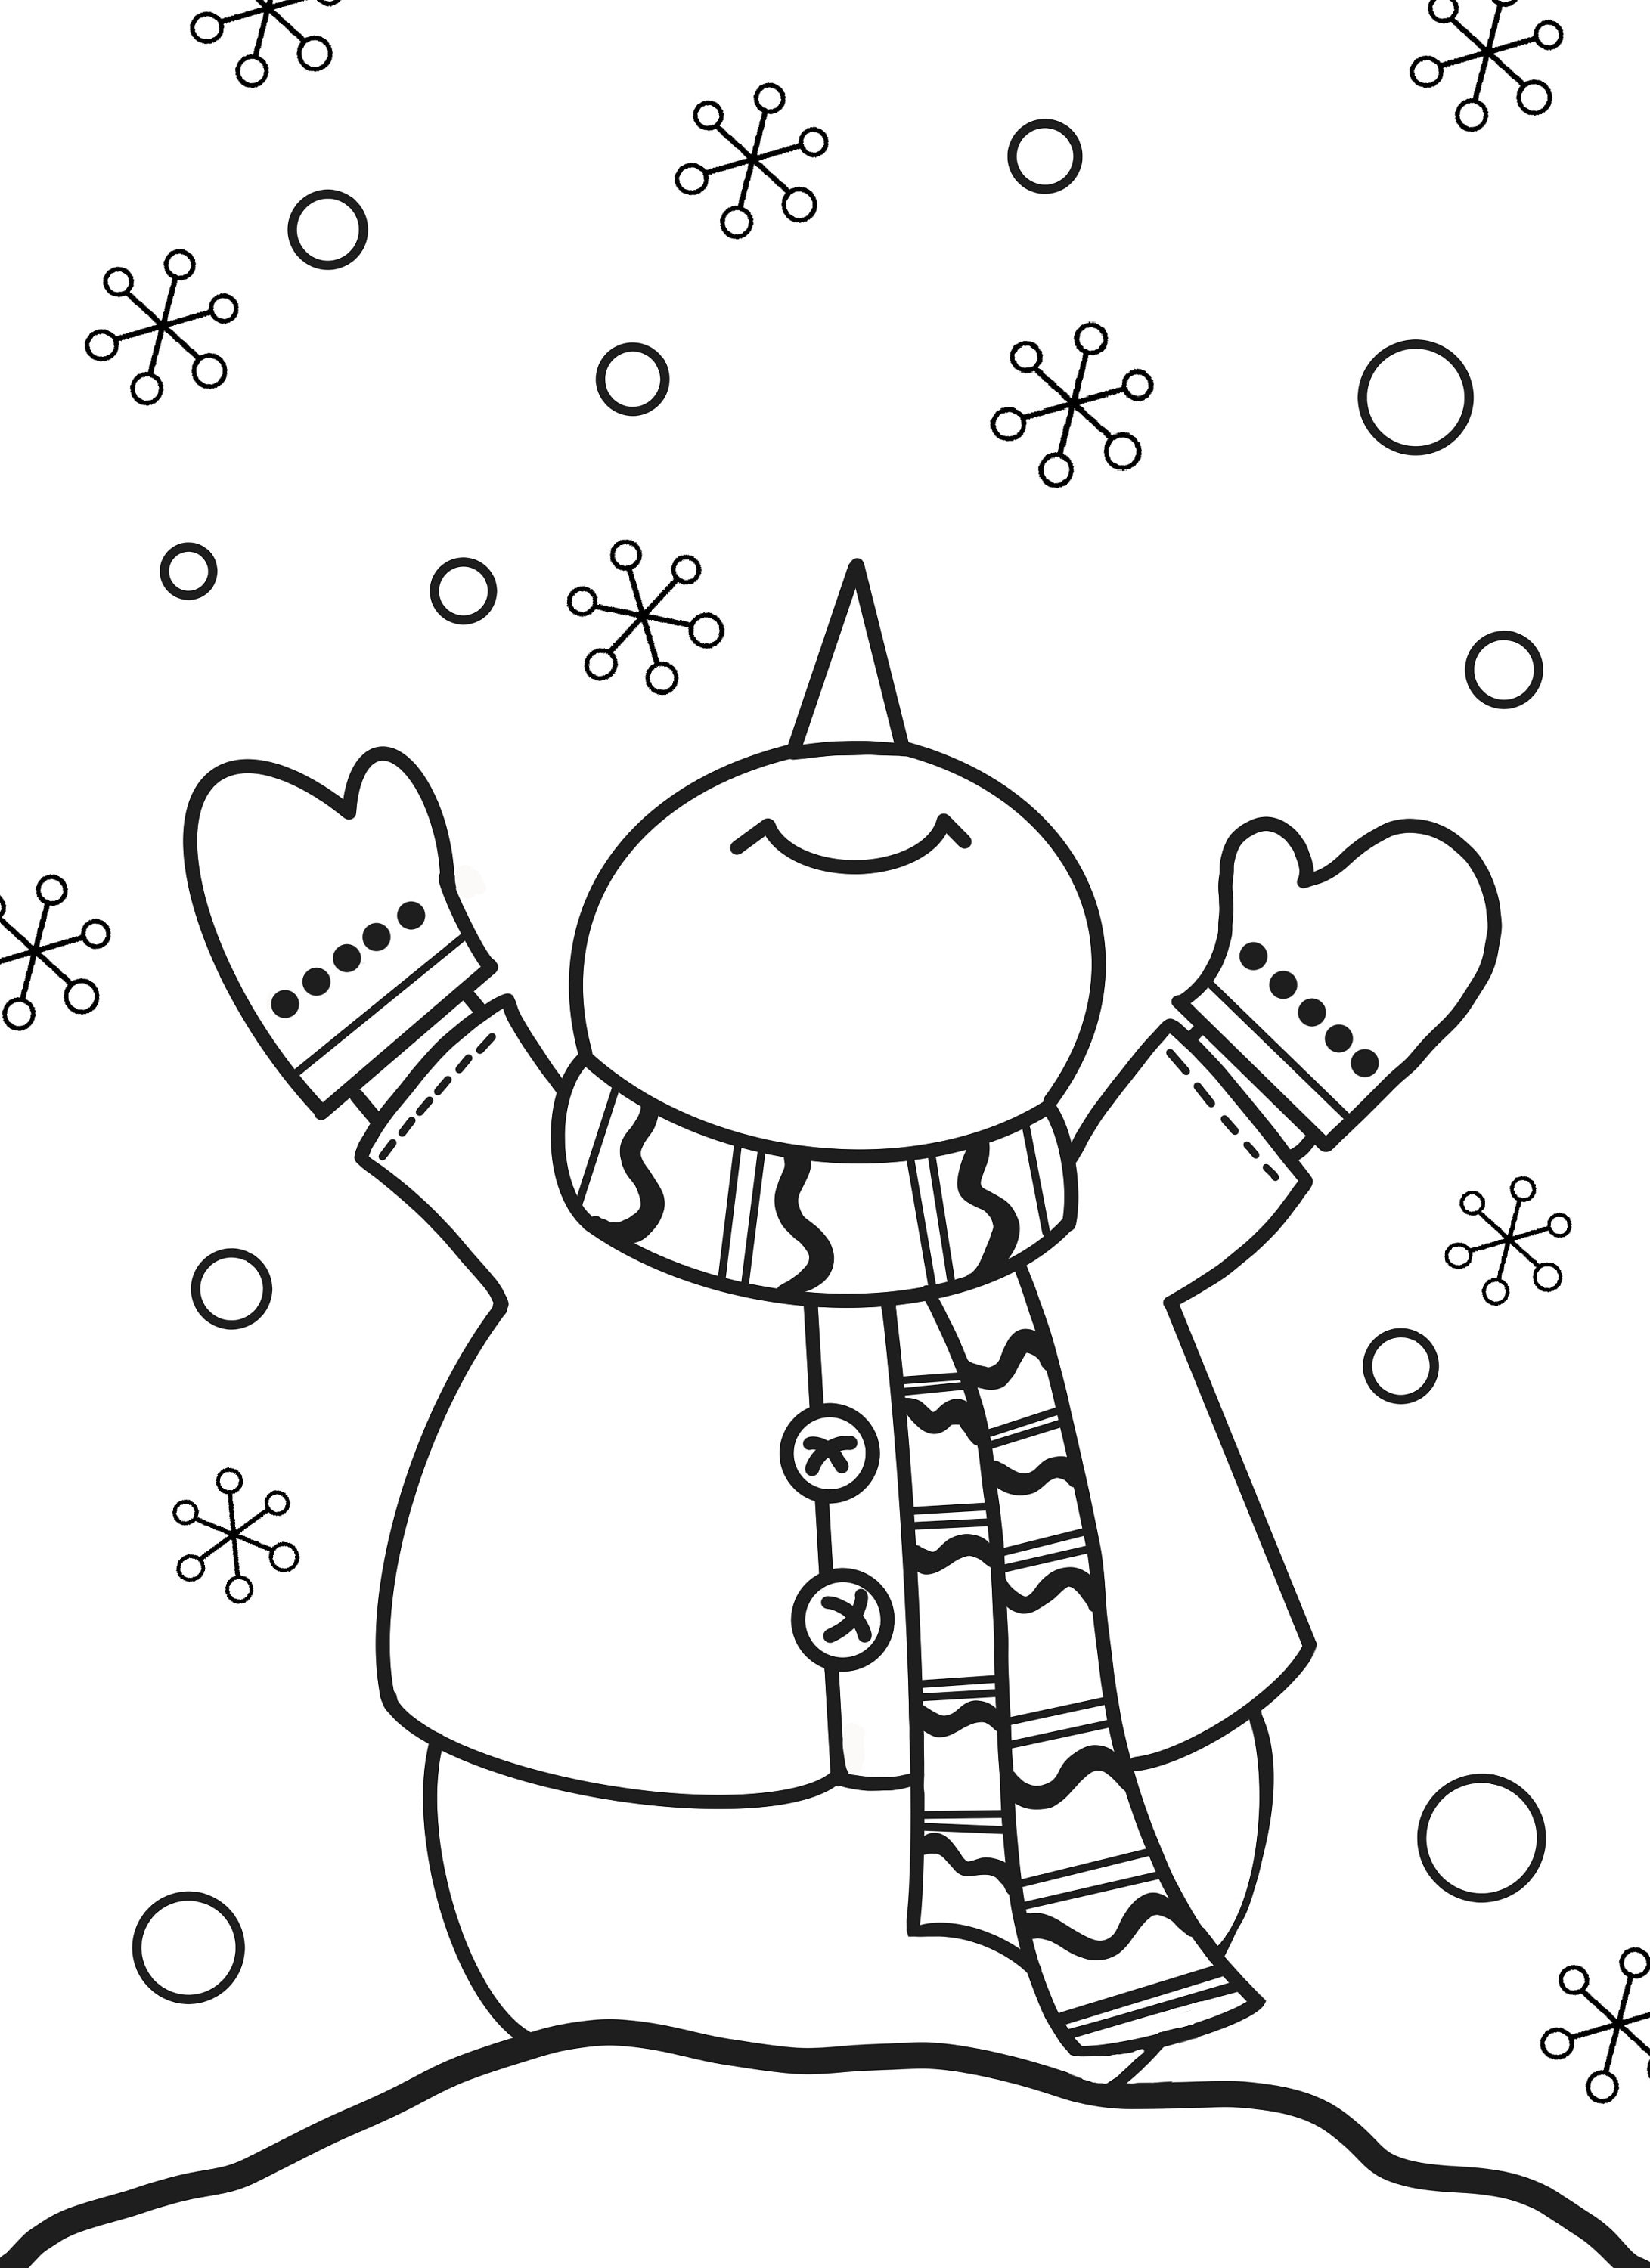 Snowman coloring page downloadable coloring page print and color coloring page for kids and adults digital coloring page christmas fun instant download